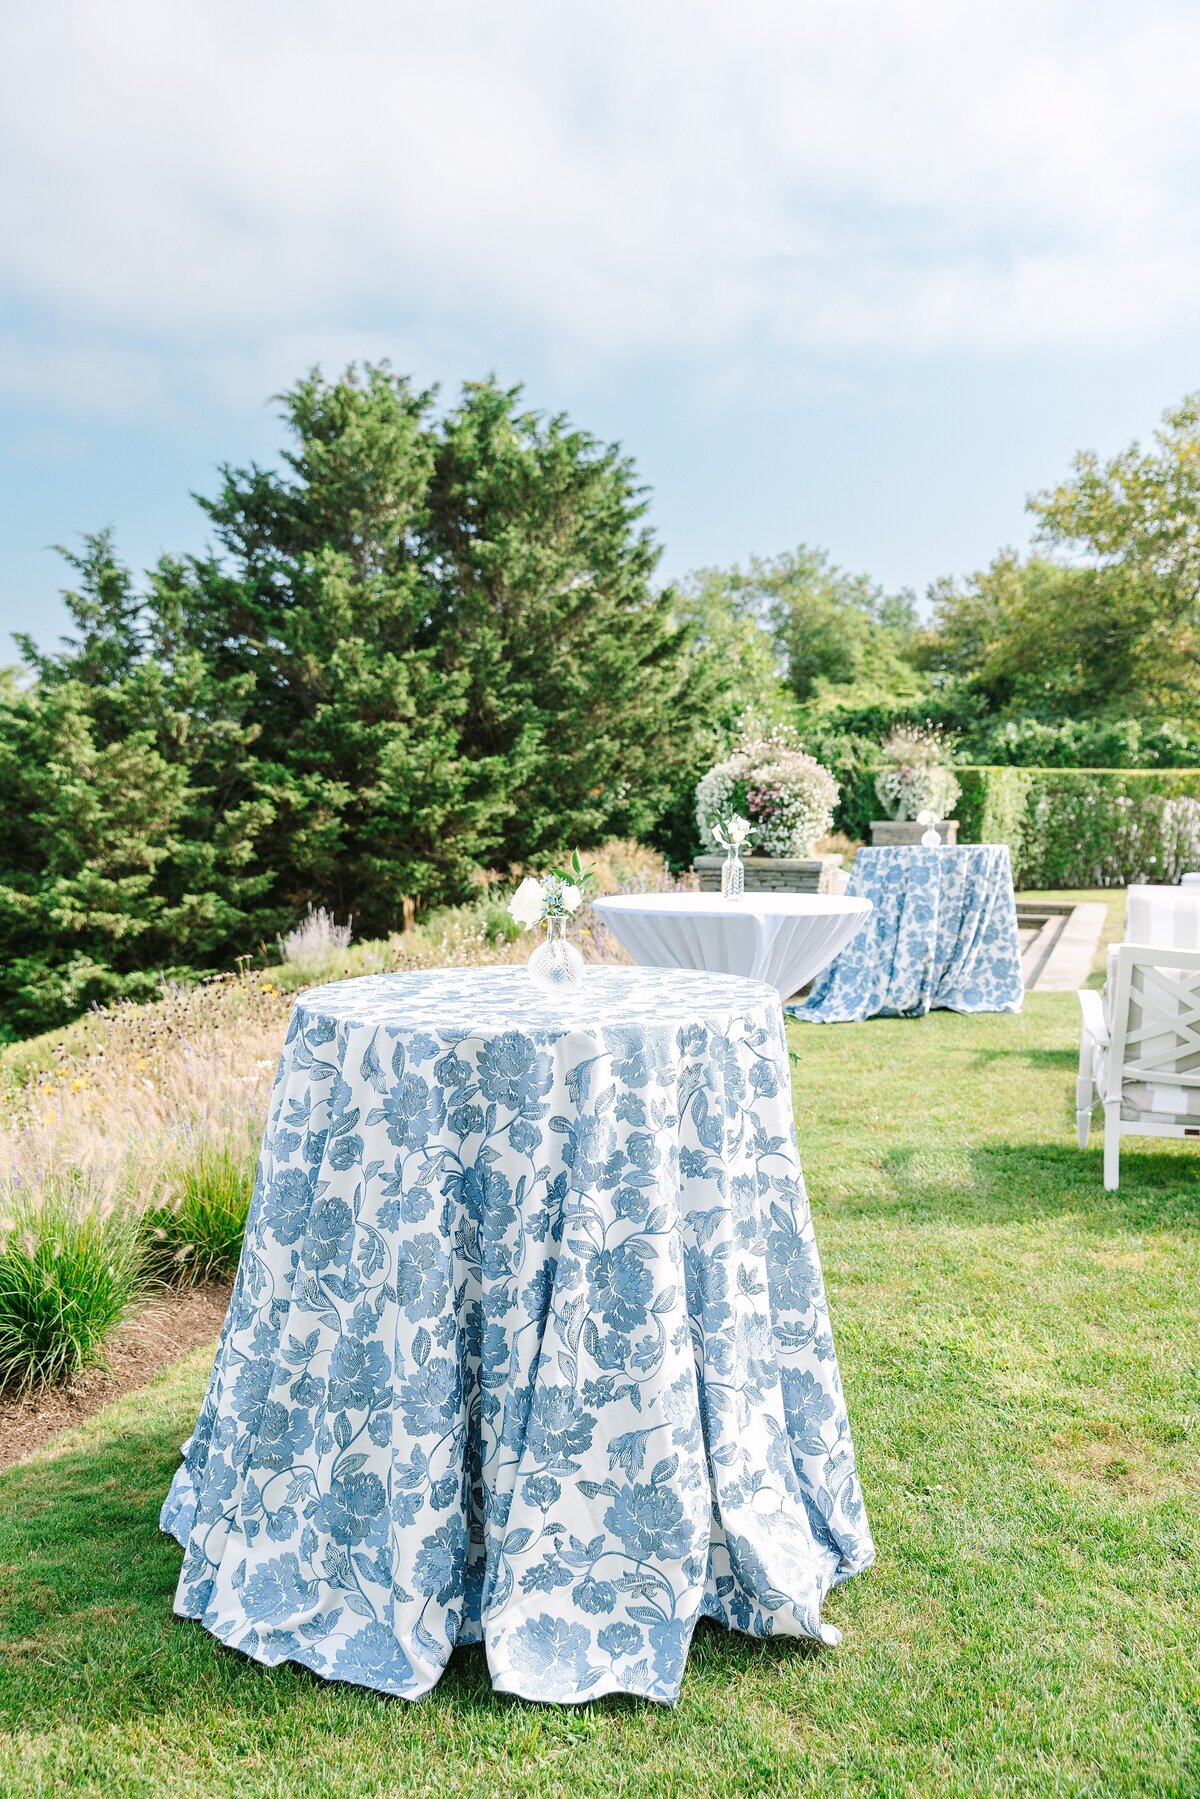 cocktail tables with blue floral pattern